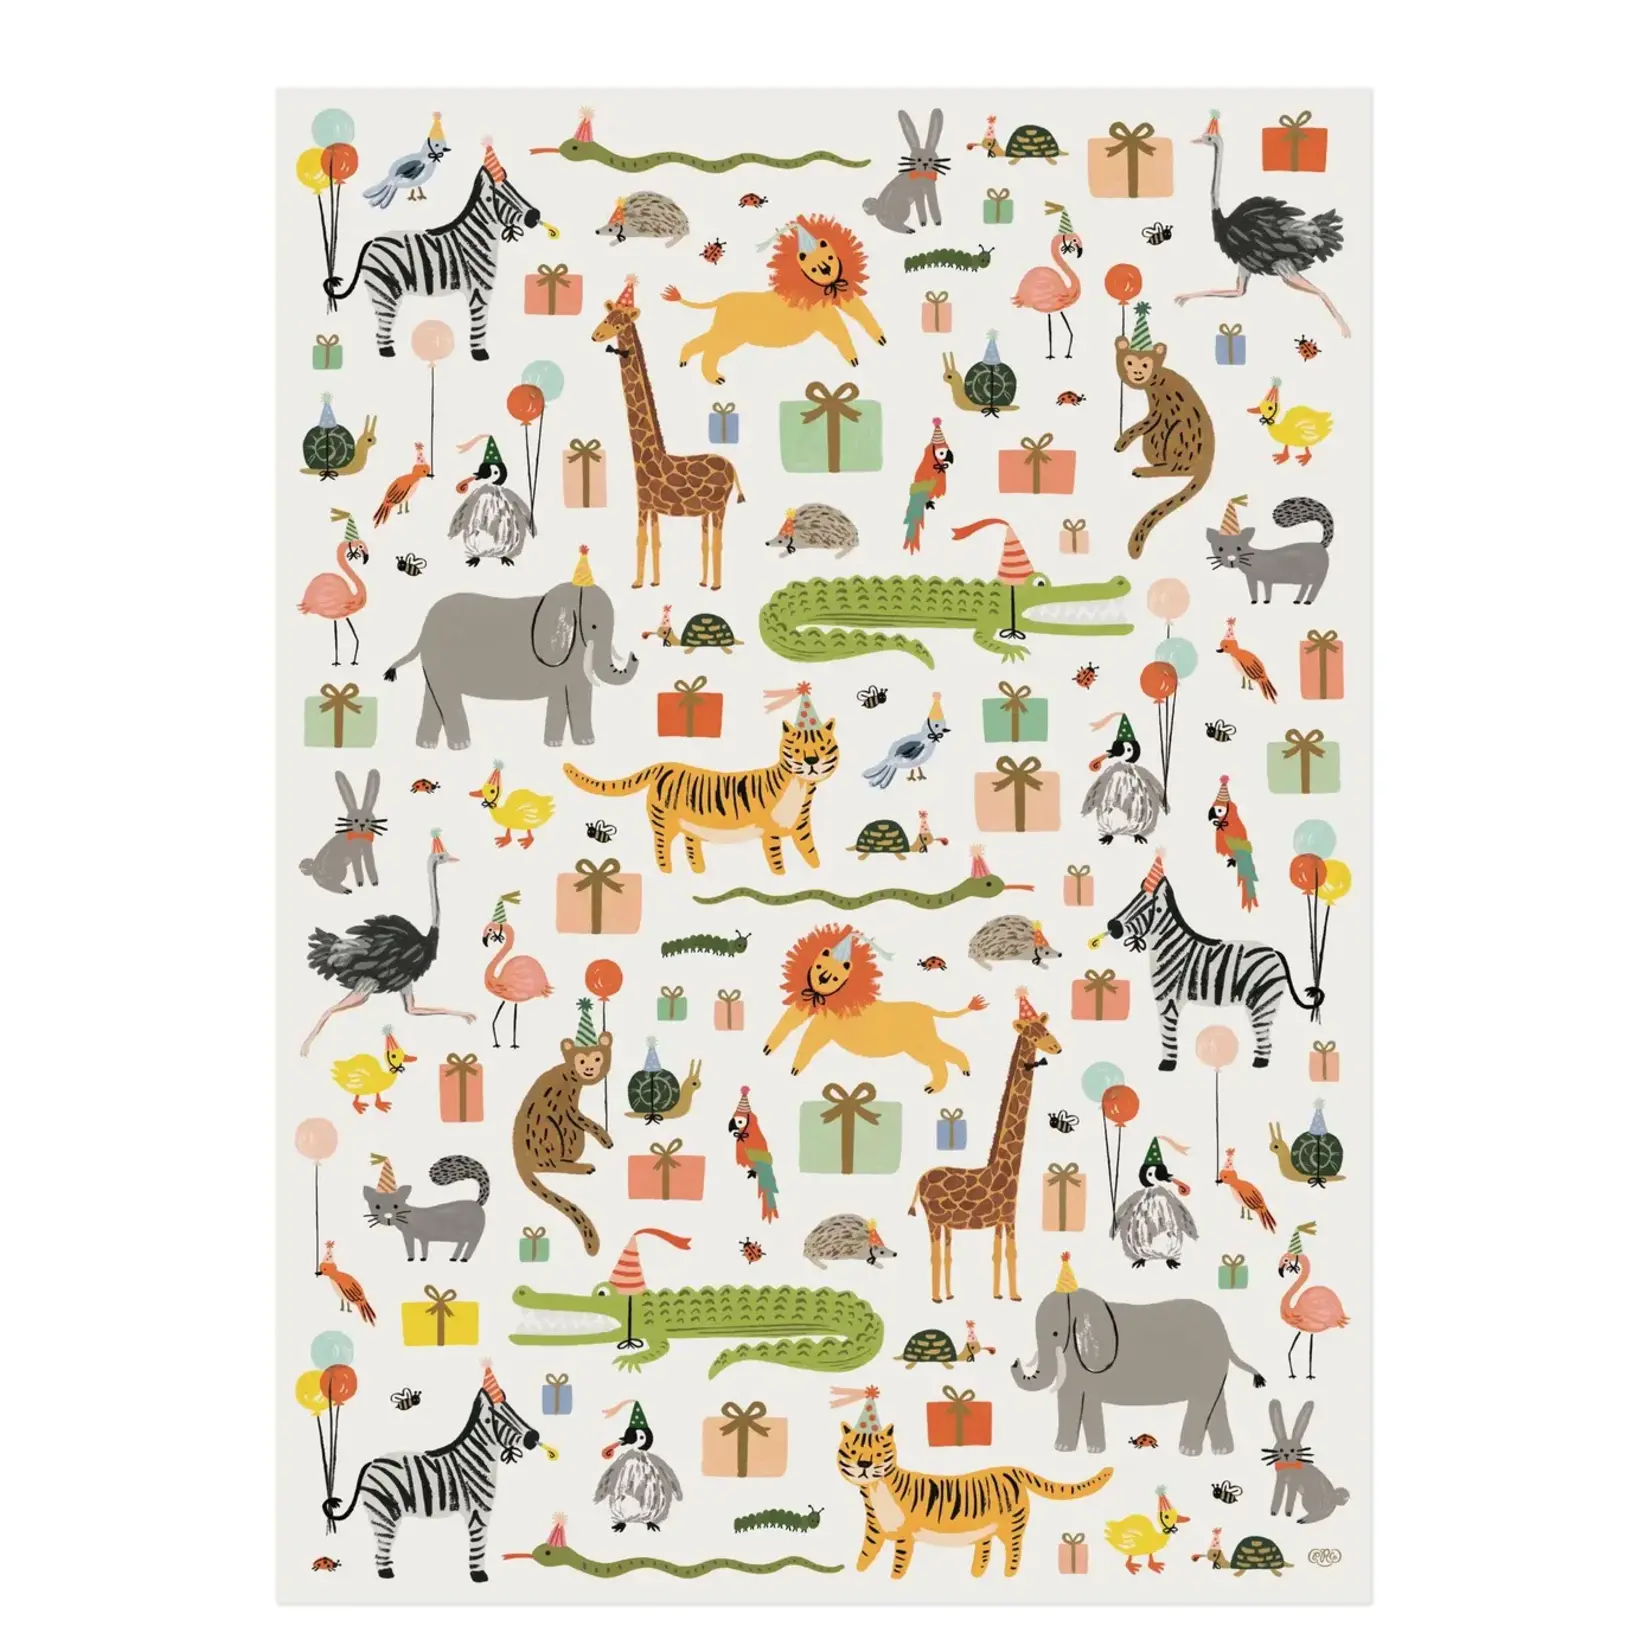 Rifle Paper Company Roll of 3 Party Animals Wrapping Sheets